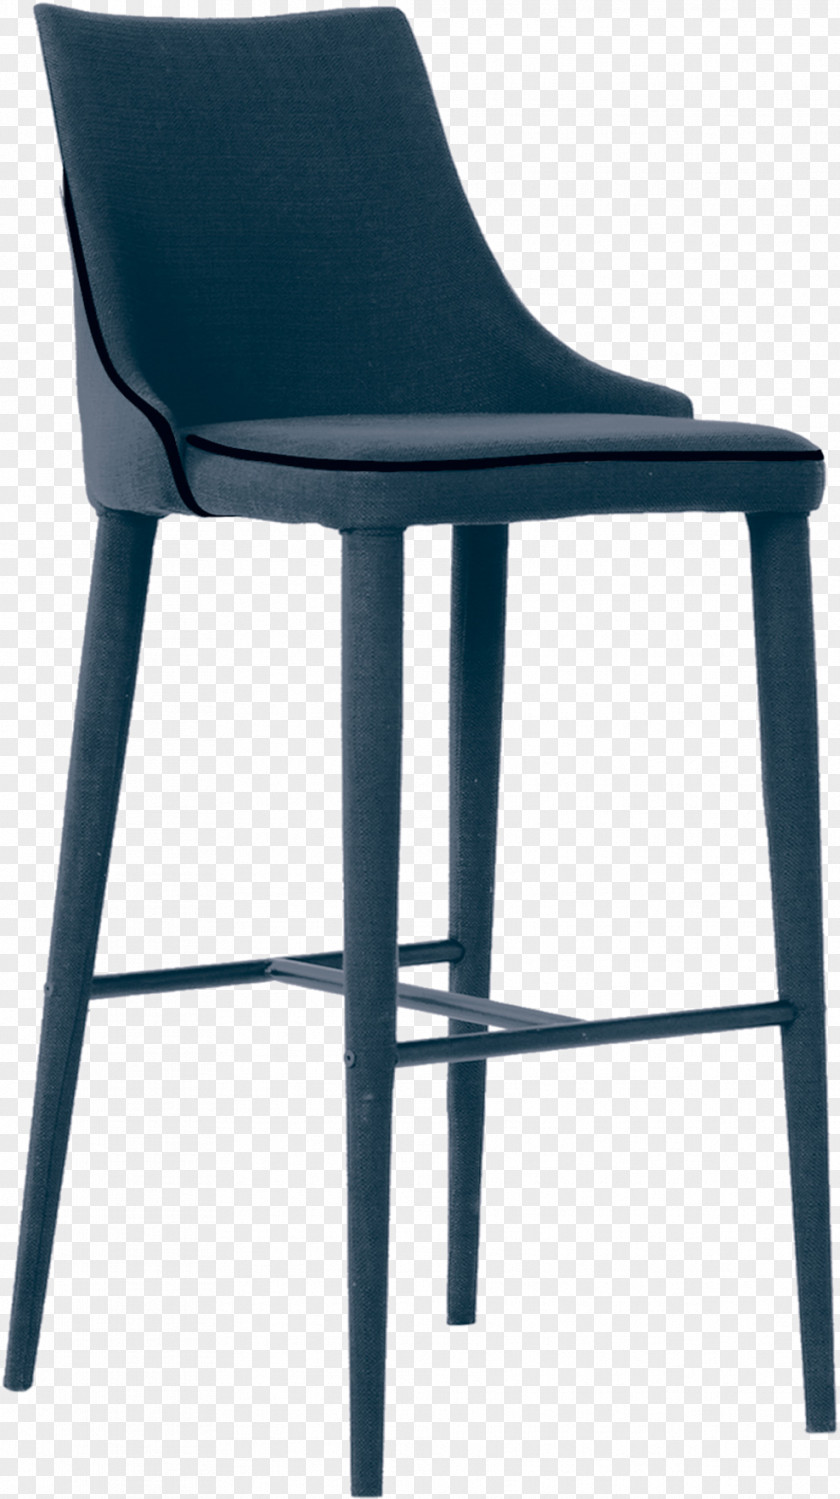 Bar Chair Side View Stool Plastic PNG